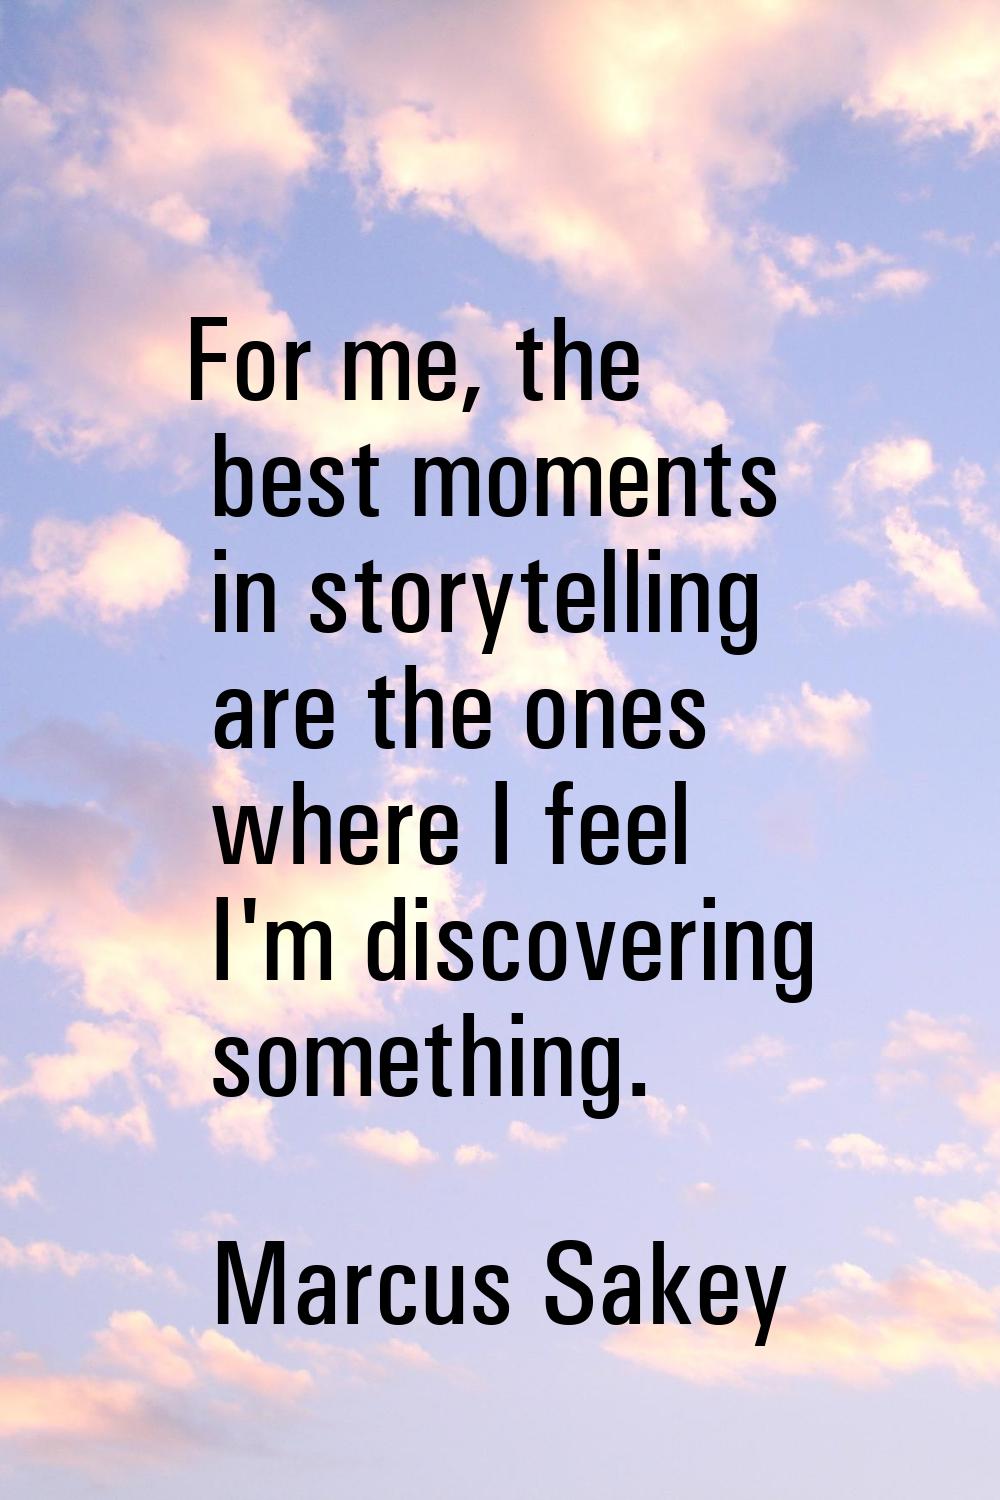 For me, the best moments in storytelling are the ones where I feel I'm discovering something.